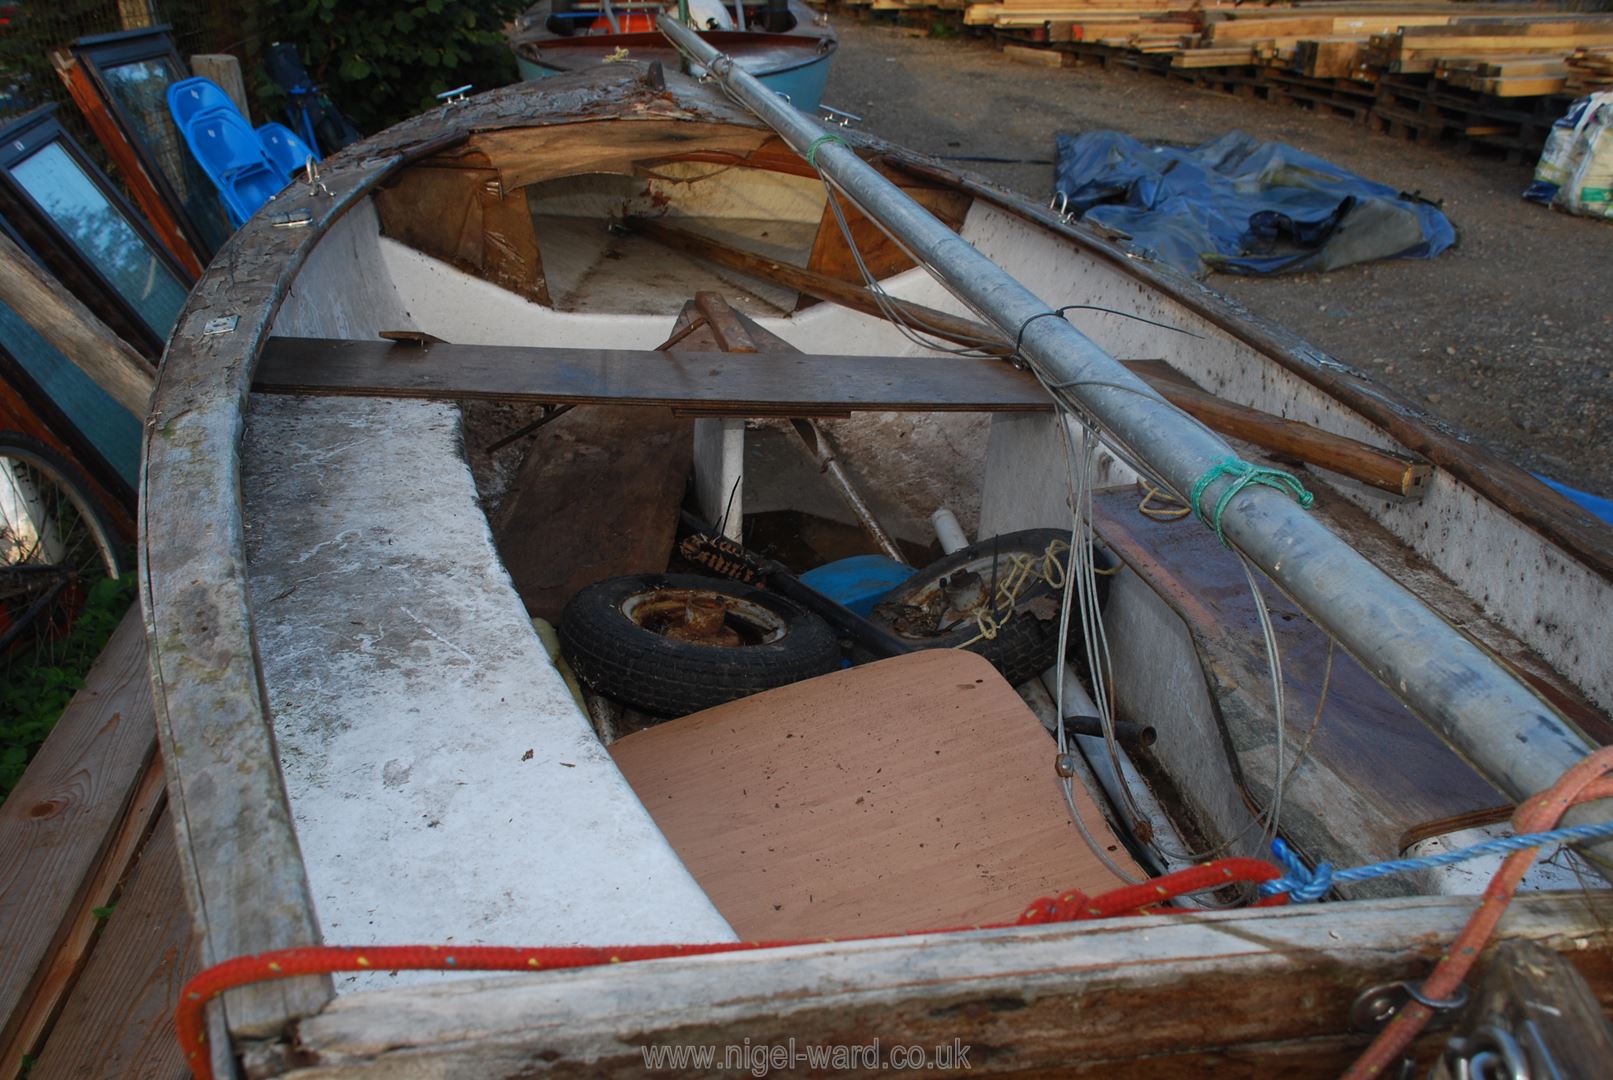 A glass fibre hulled sailing dinghy for restoration with 17' 2" high aluminium mast, fittings, - Image 6 of 14